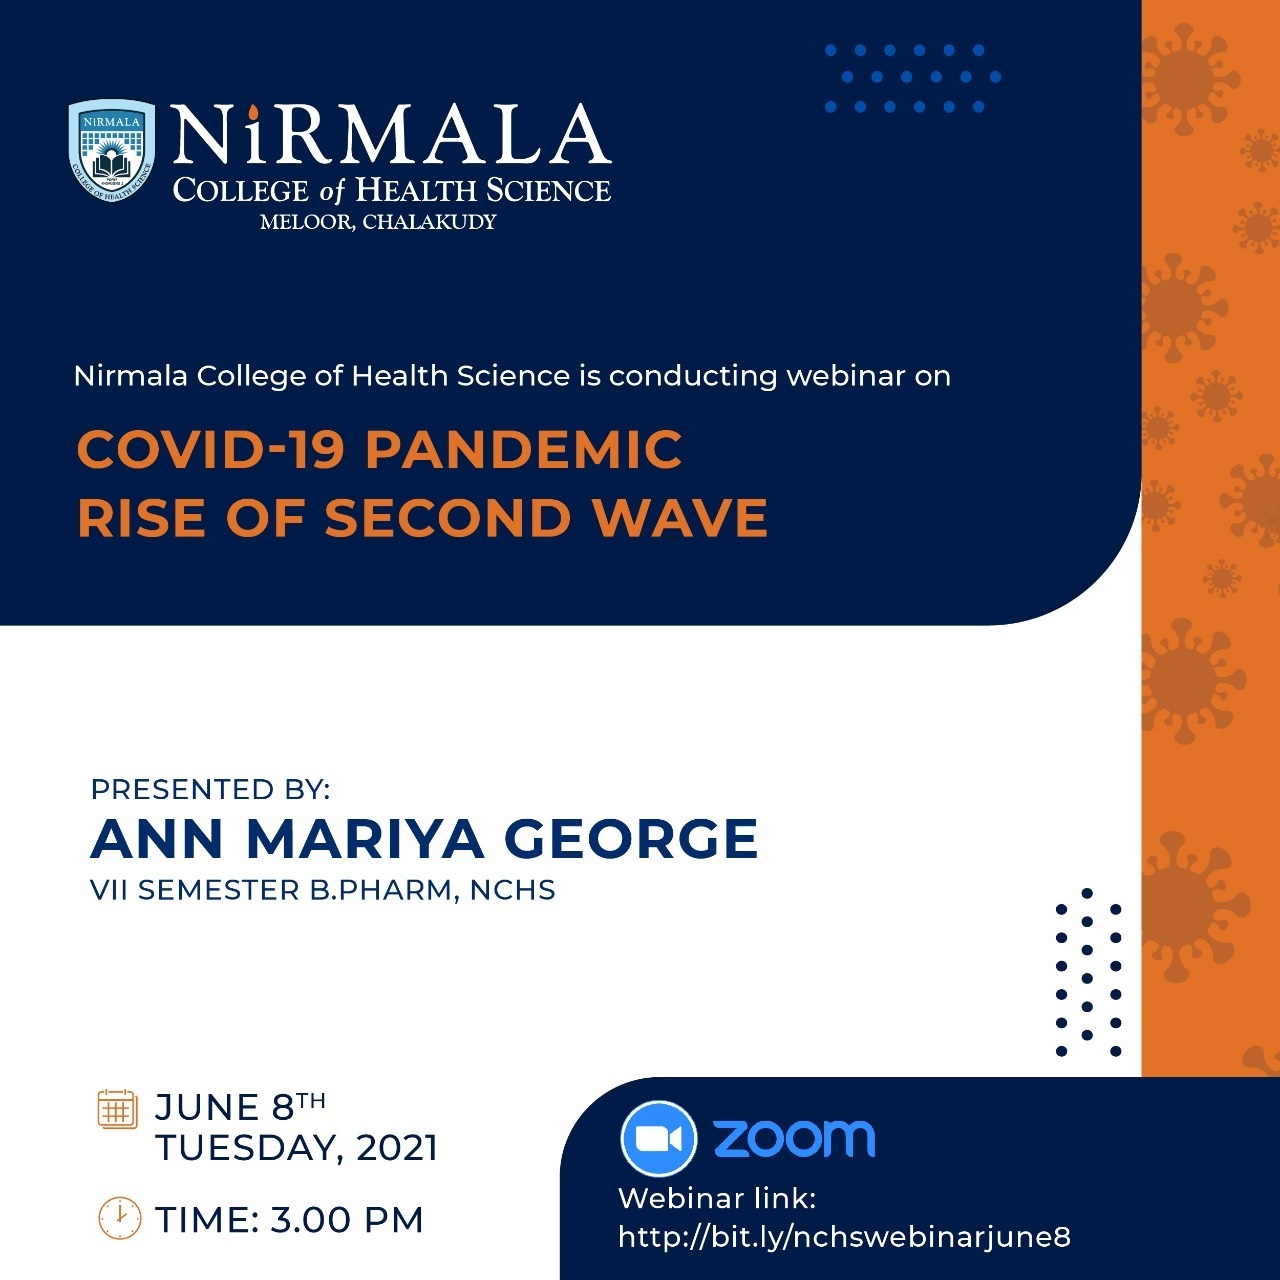 Webinar on Covid-19 Pandemic Rise of Second Wave